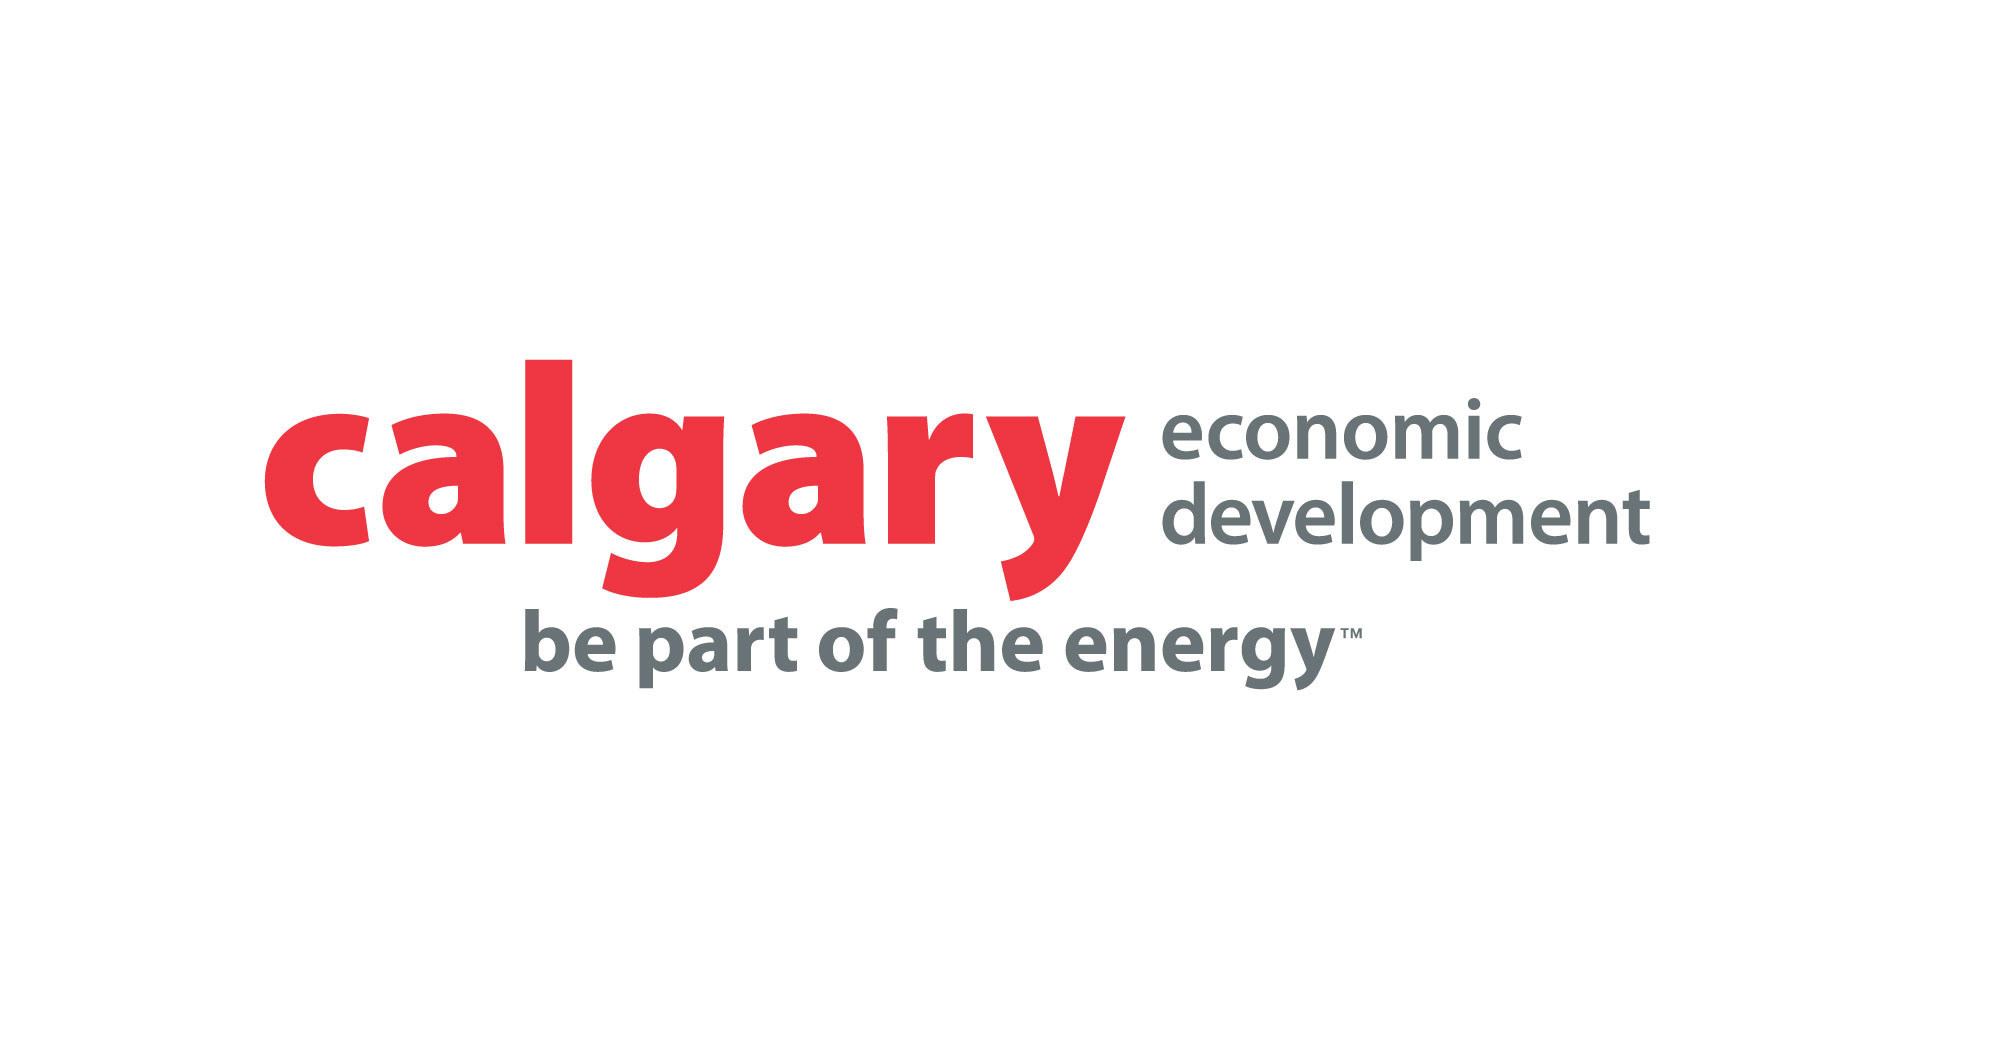 Infosys Announces Major Investment With 500 Jobs For Calgary